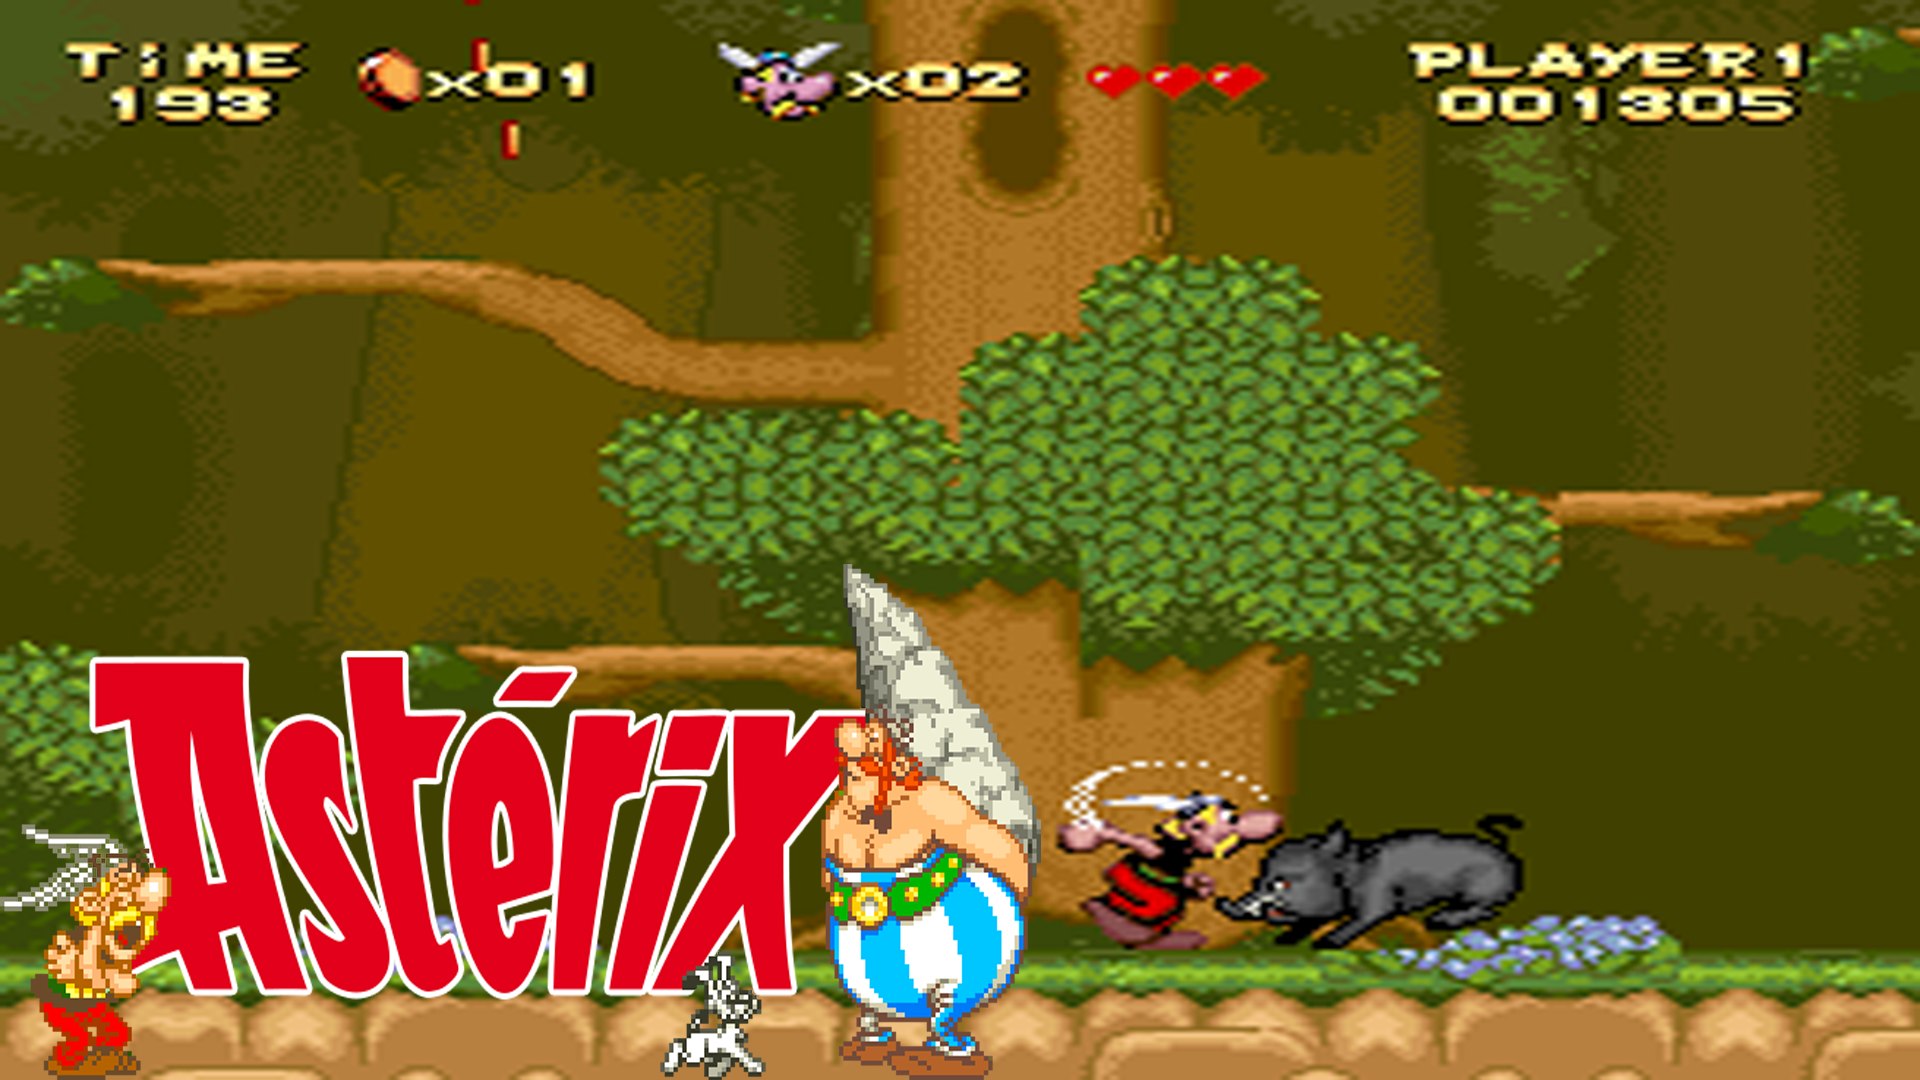 Asterix [SNES] (Demo/Gameplay) No Comments - Vídeo Dailymotion